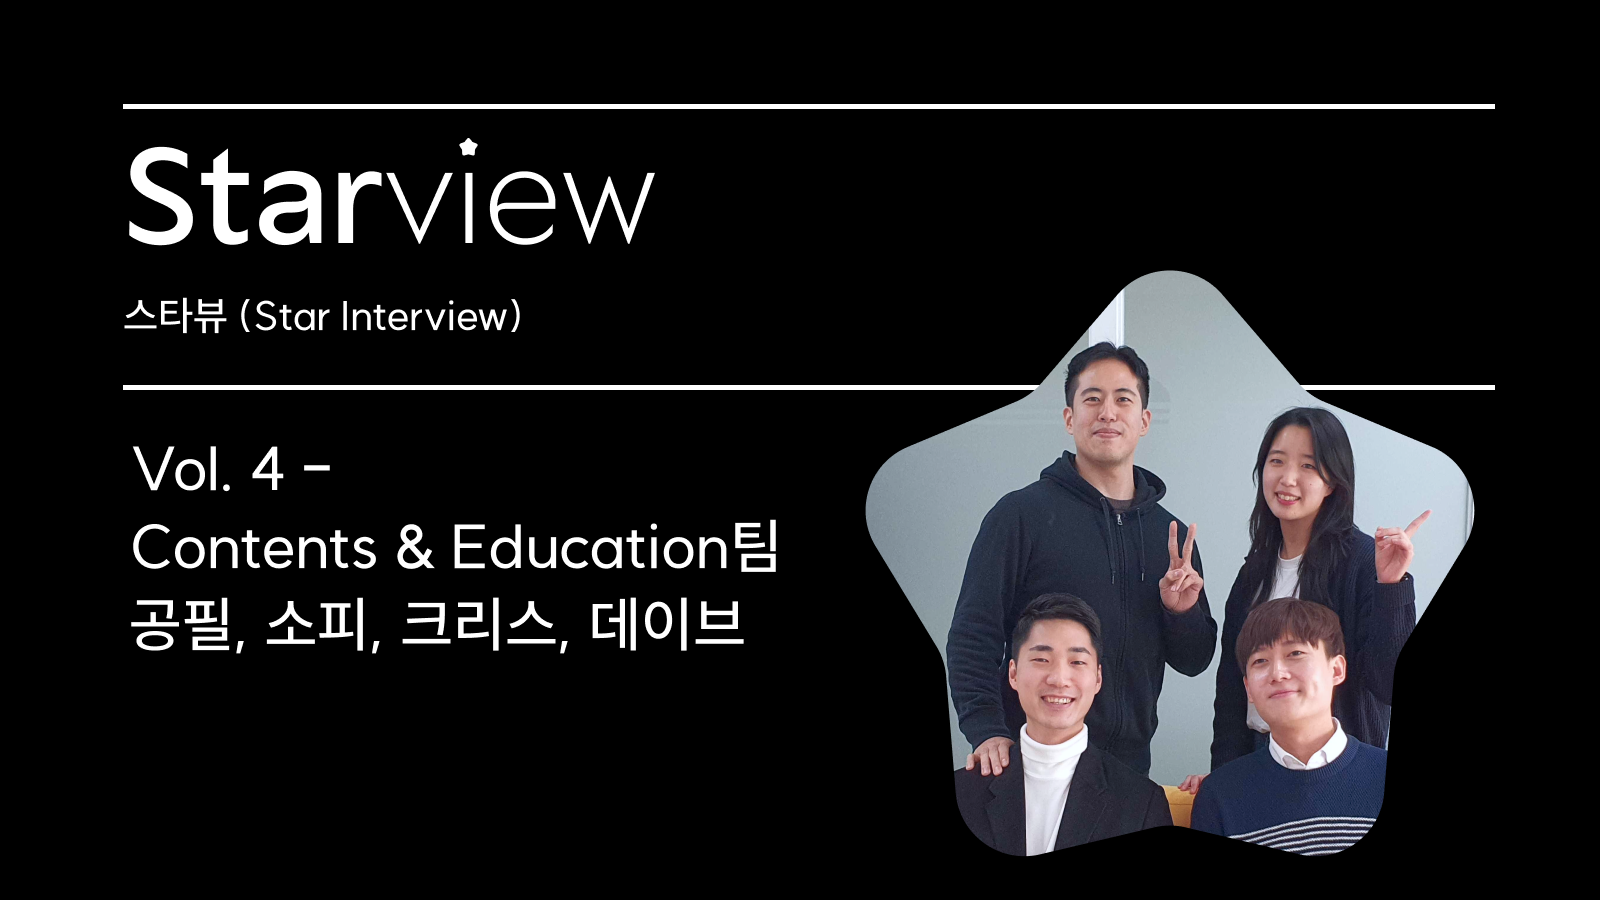 Education powerhouse helping expand AI base - [Star View Vol. 4] Contents & Education Team